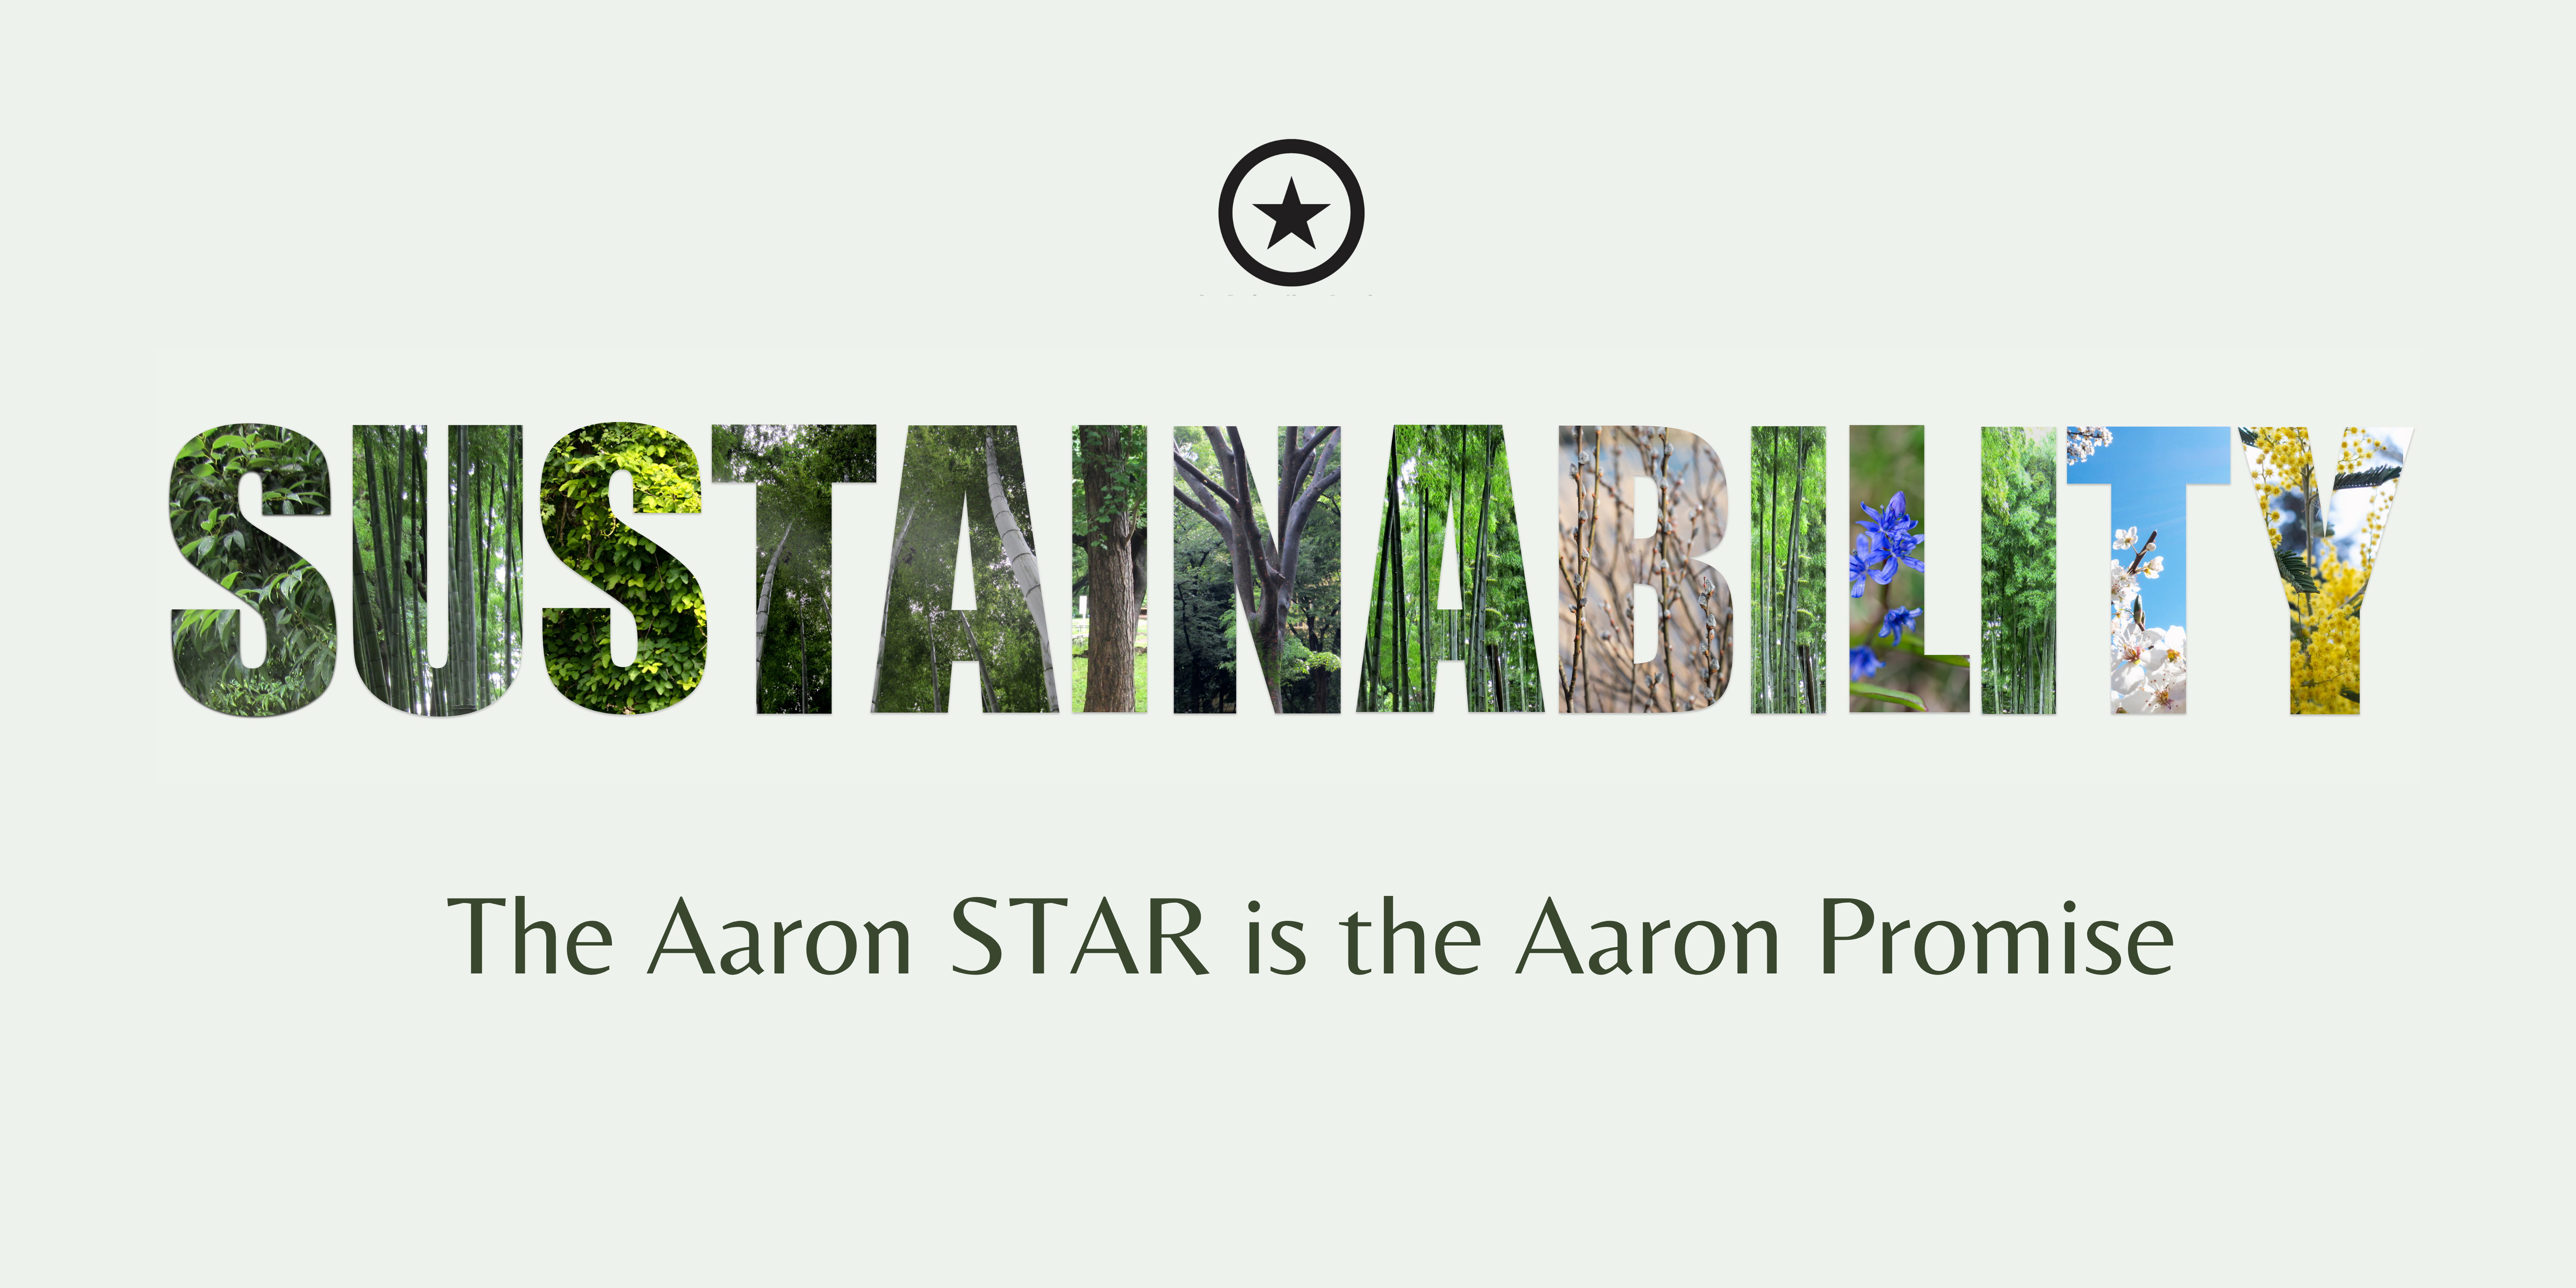 Our Sustainability Policies